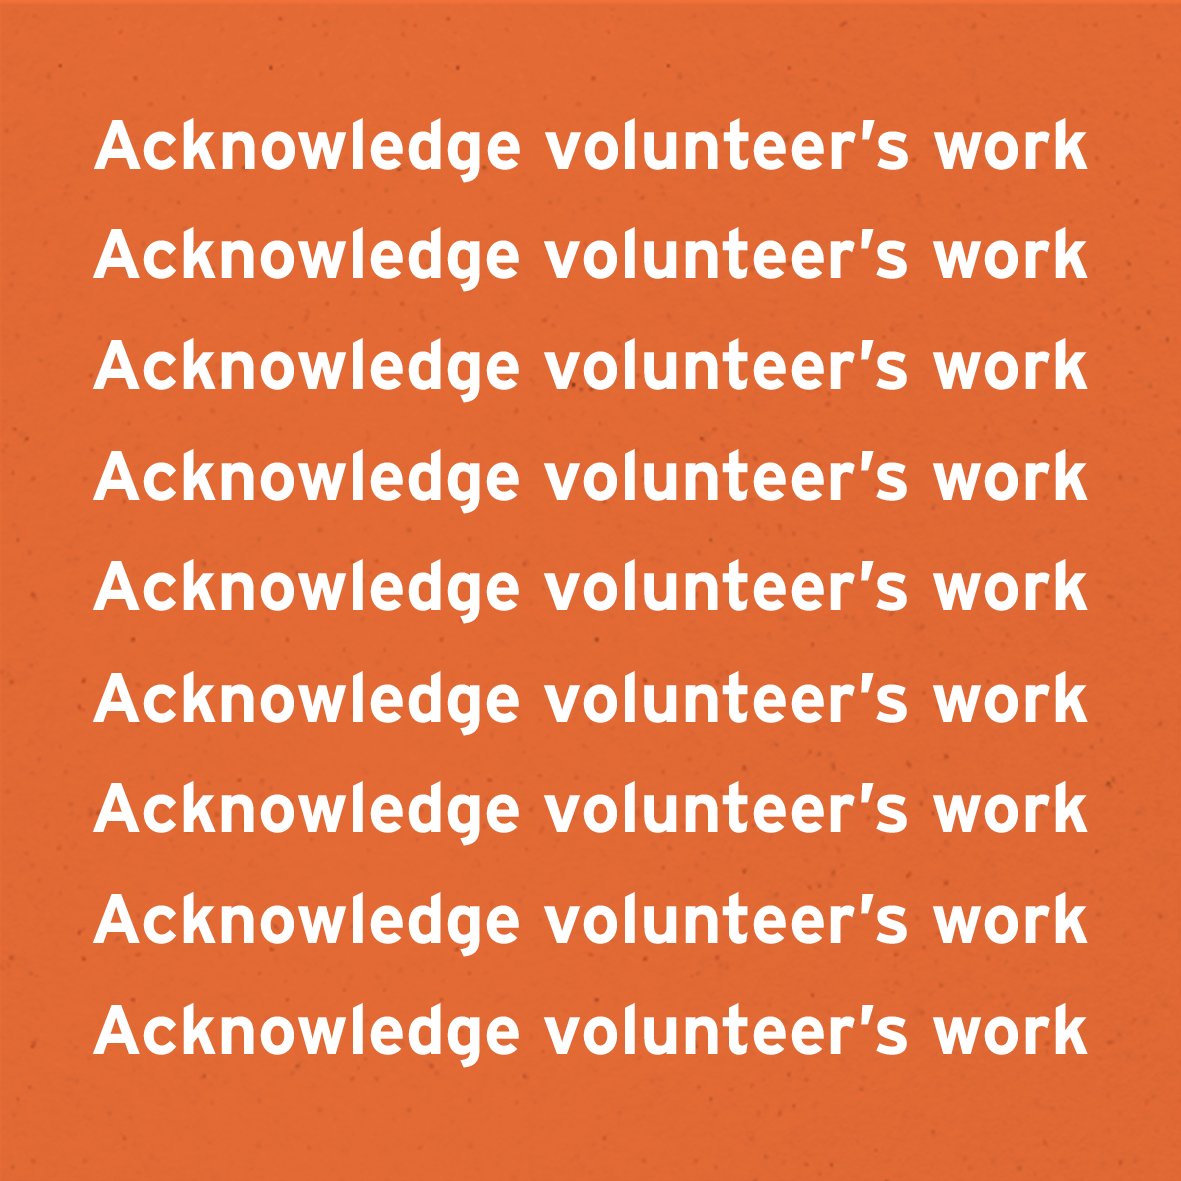 Dear #volunteers, we will always need your ⏳Time 💙Love 🧰Skills 🫂Solidarity 👍Compassion 🎯Commitment Thank you for being the change the world needs.